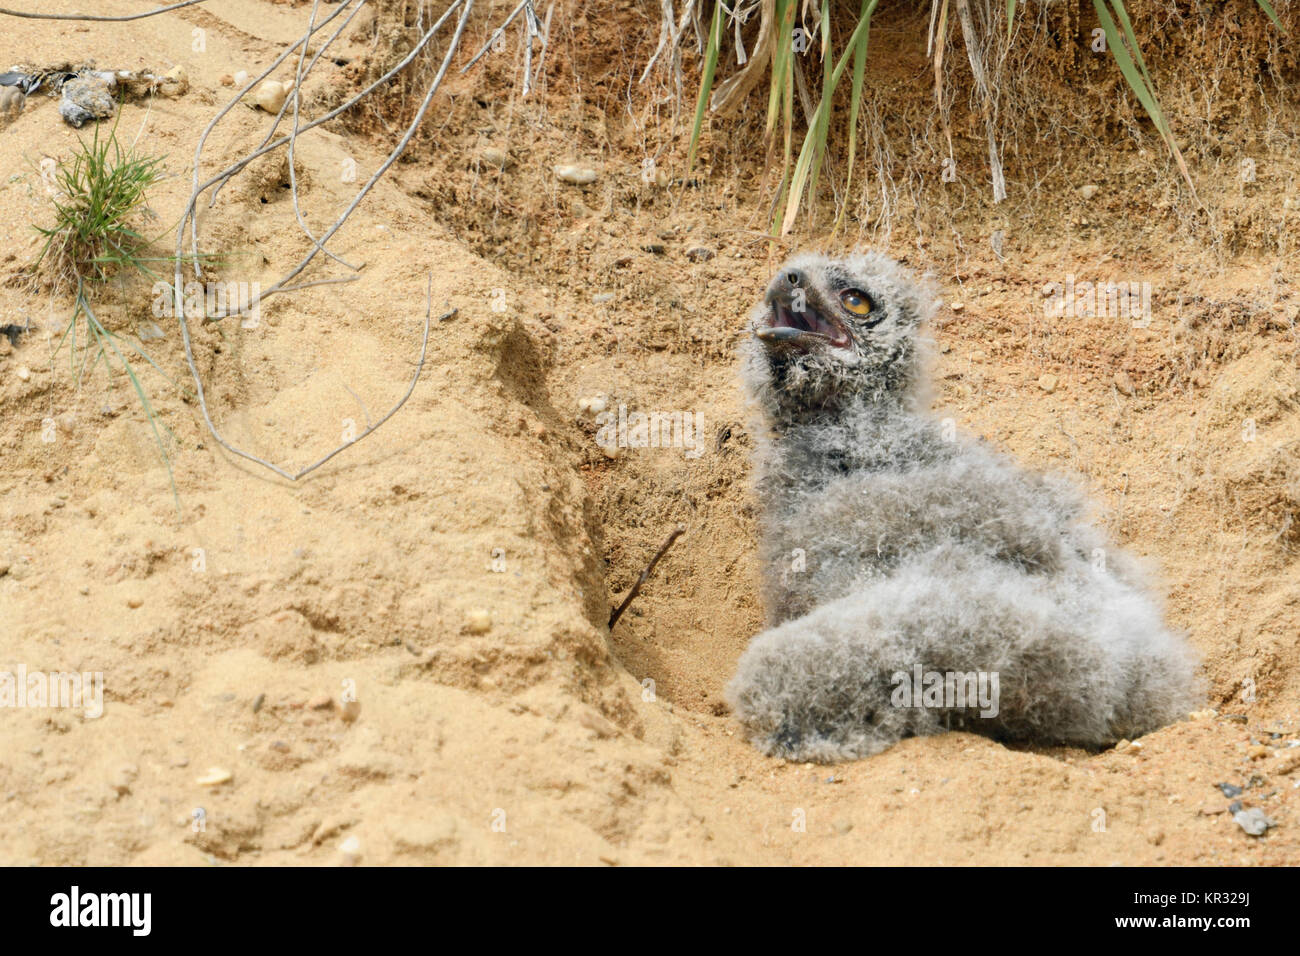 Eurasian Eagle Owl ( Bubo bubo ), very young chick, baby owl, fallen out of its nesting burrow in a sand pit, helpless, cute, wildlife, Europe. Stock Photo